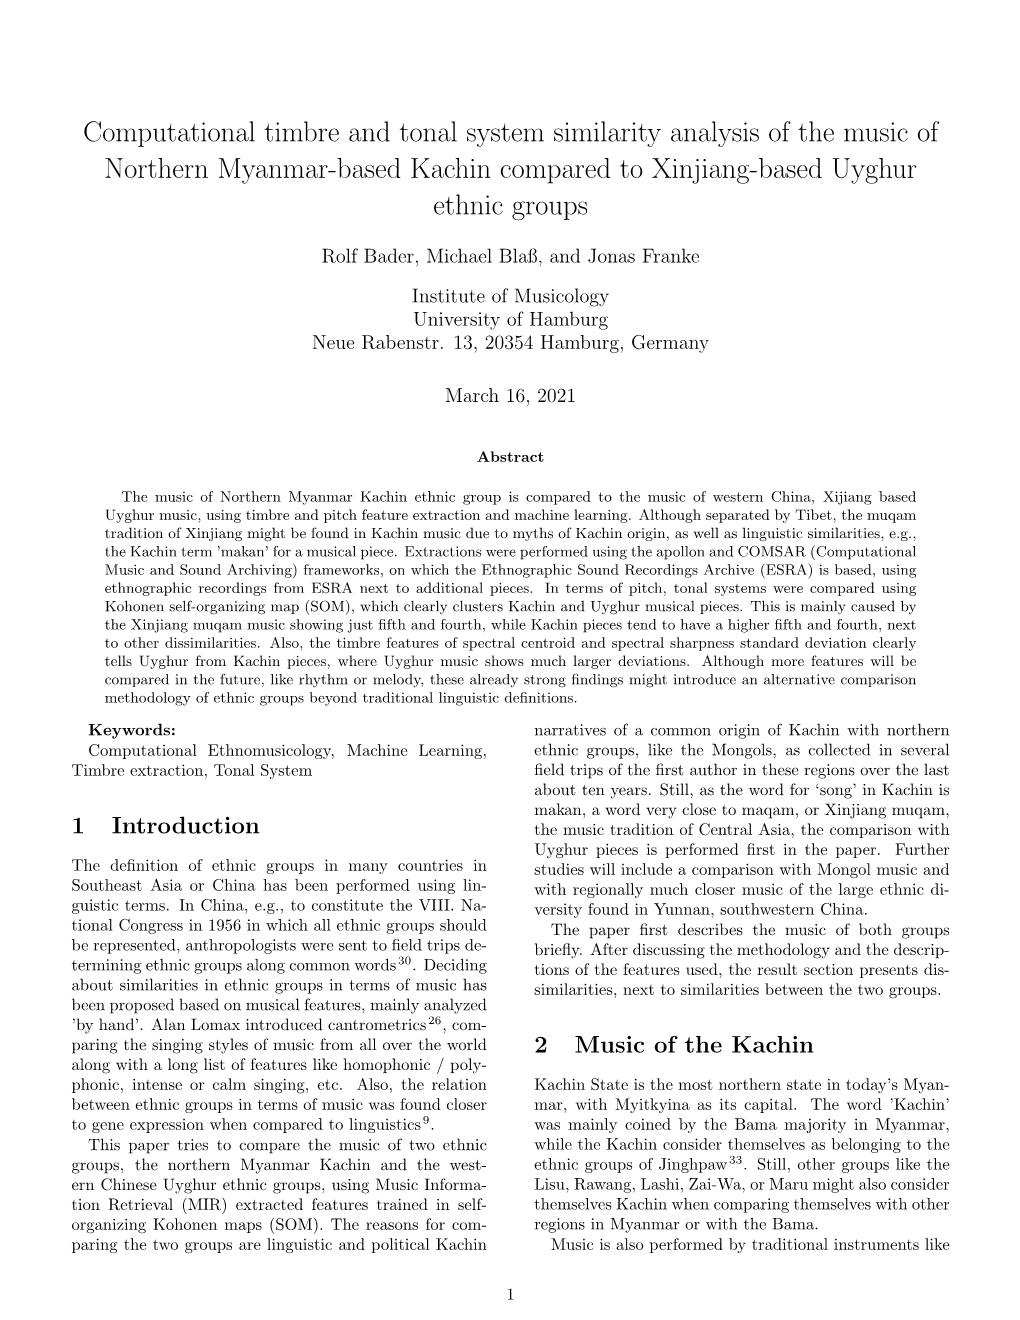 Computational Timbre and Tonal System Similarity Analysis of the Music of Northern Myanmar-Based Kachin Compared to Xinjiang-Based Uyghur Ethnic Groups